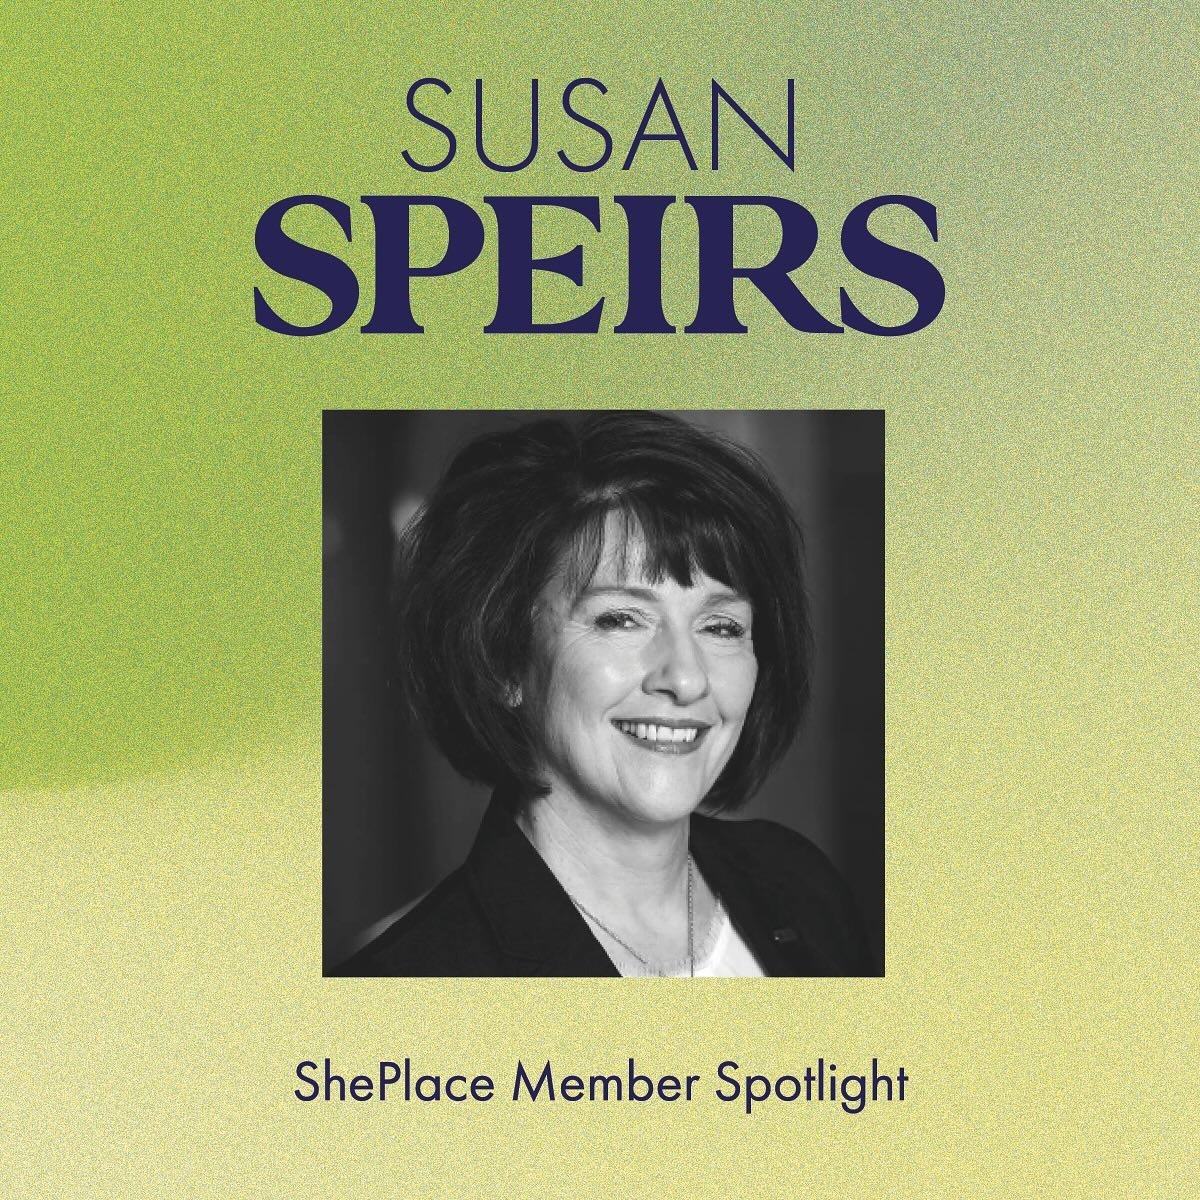 💡 Meet this week&rsquo;s community spotlight, Susan Speirs! 

Susan has been the CEO of the UACPA since July 2013. Susan has always been involved with the business environment and the profession. She is very active in policy issues at the Utah state